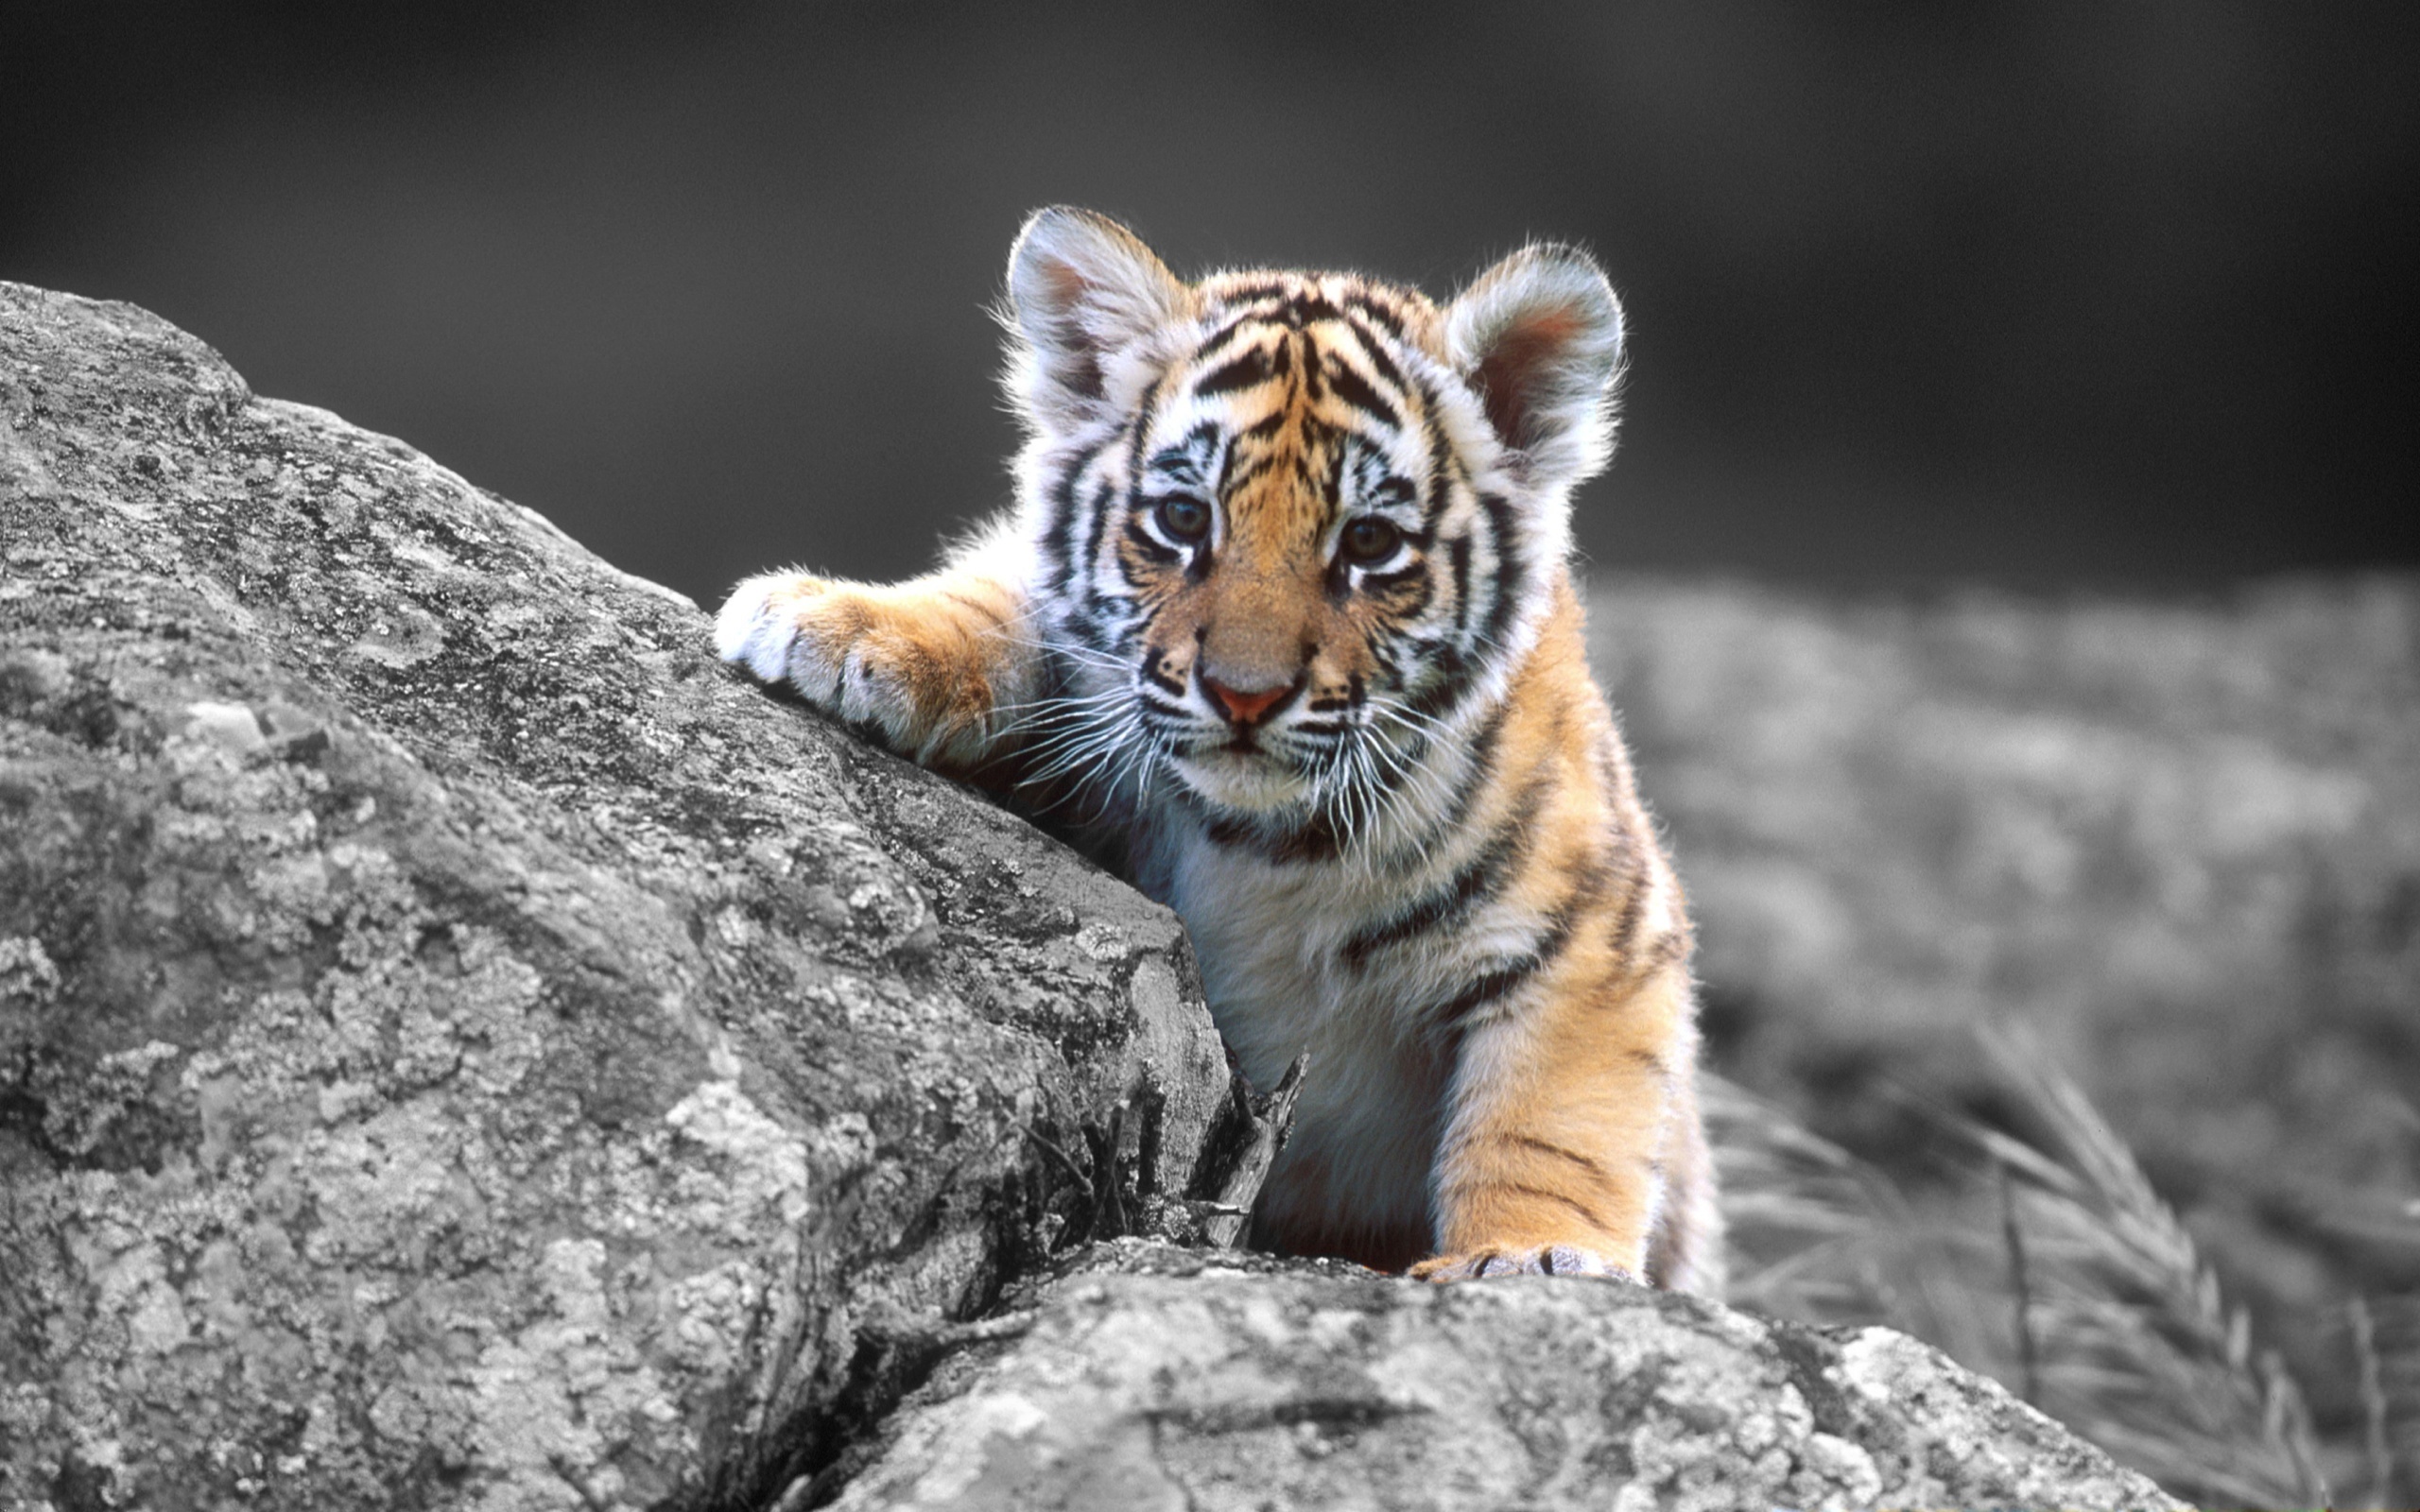 Precious baby animals, Wide variety, Adorable innocence, Wholesome wallpapers, 2560x1600 HD Desktop